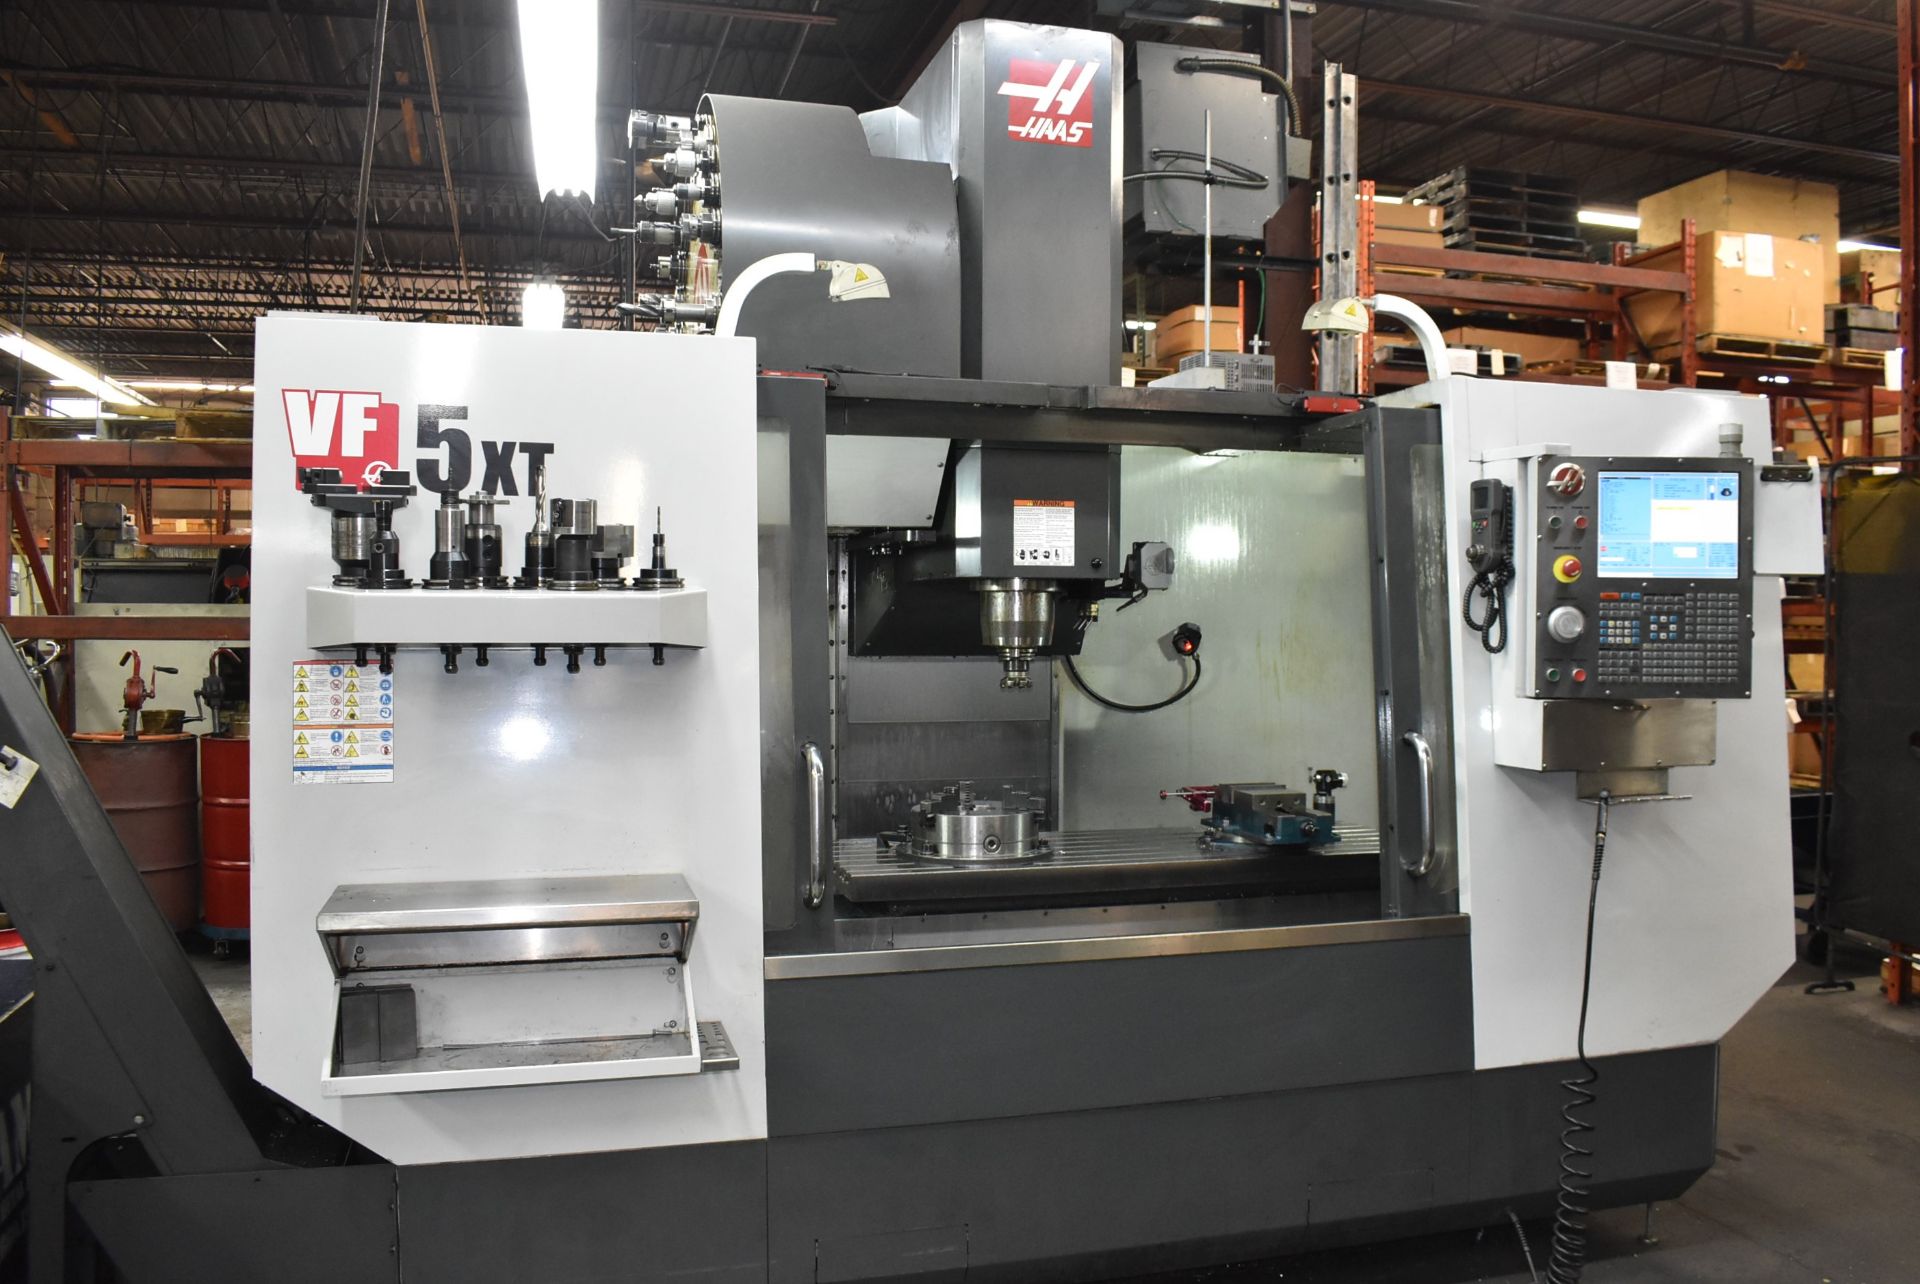 HAAS (2012) VF-5 CNC VERTICAL MACHINING CENTER WITH HAAS CNC CONTROL, 23" X 62" T-SLOT TABLE, - Image 3 of 3